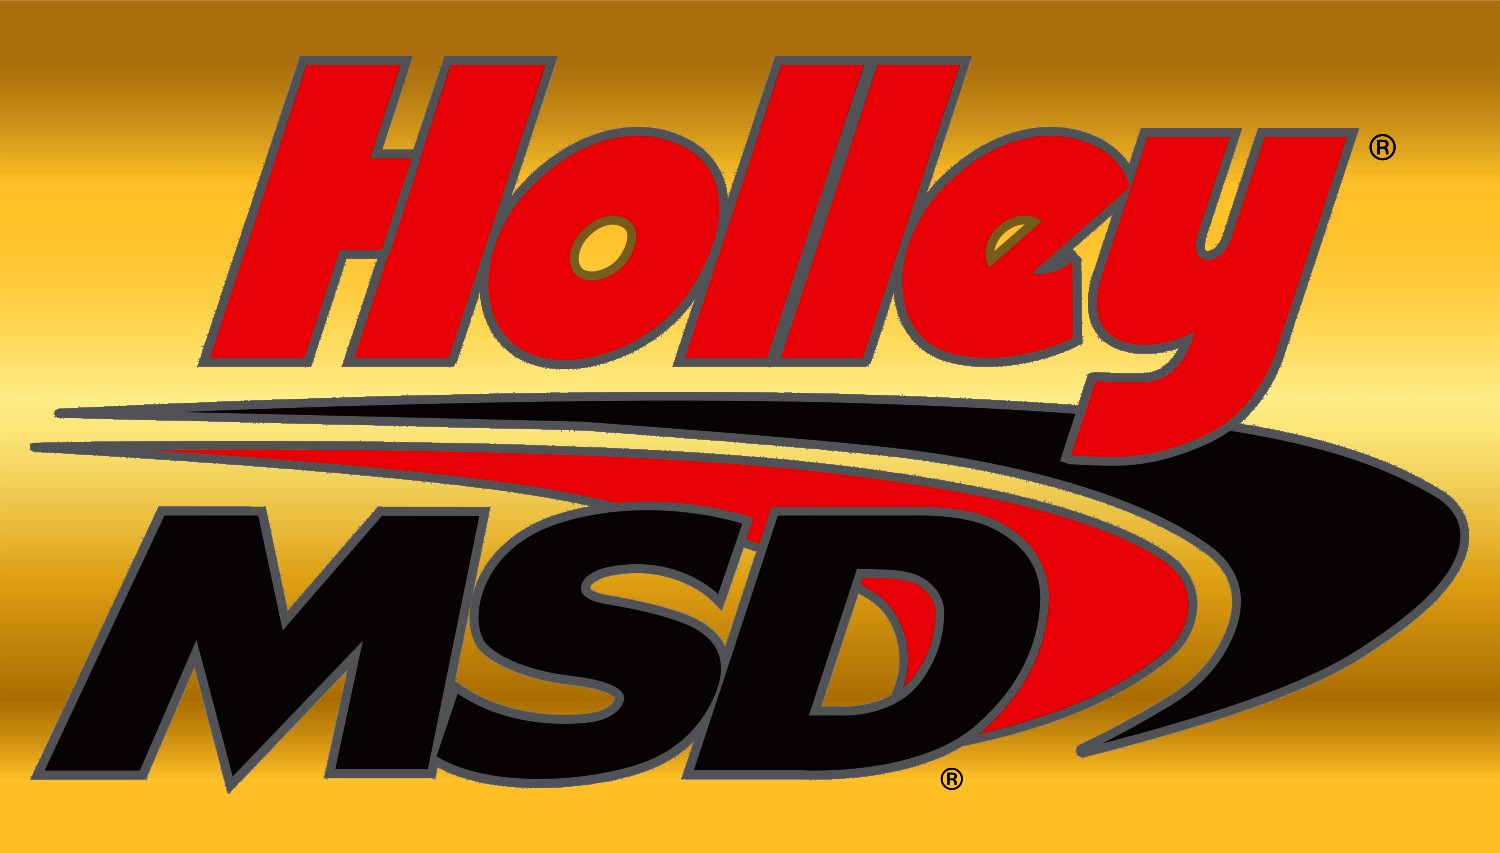 Holley MSD New logo.png